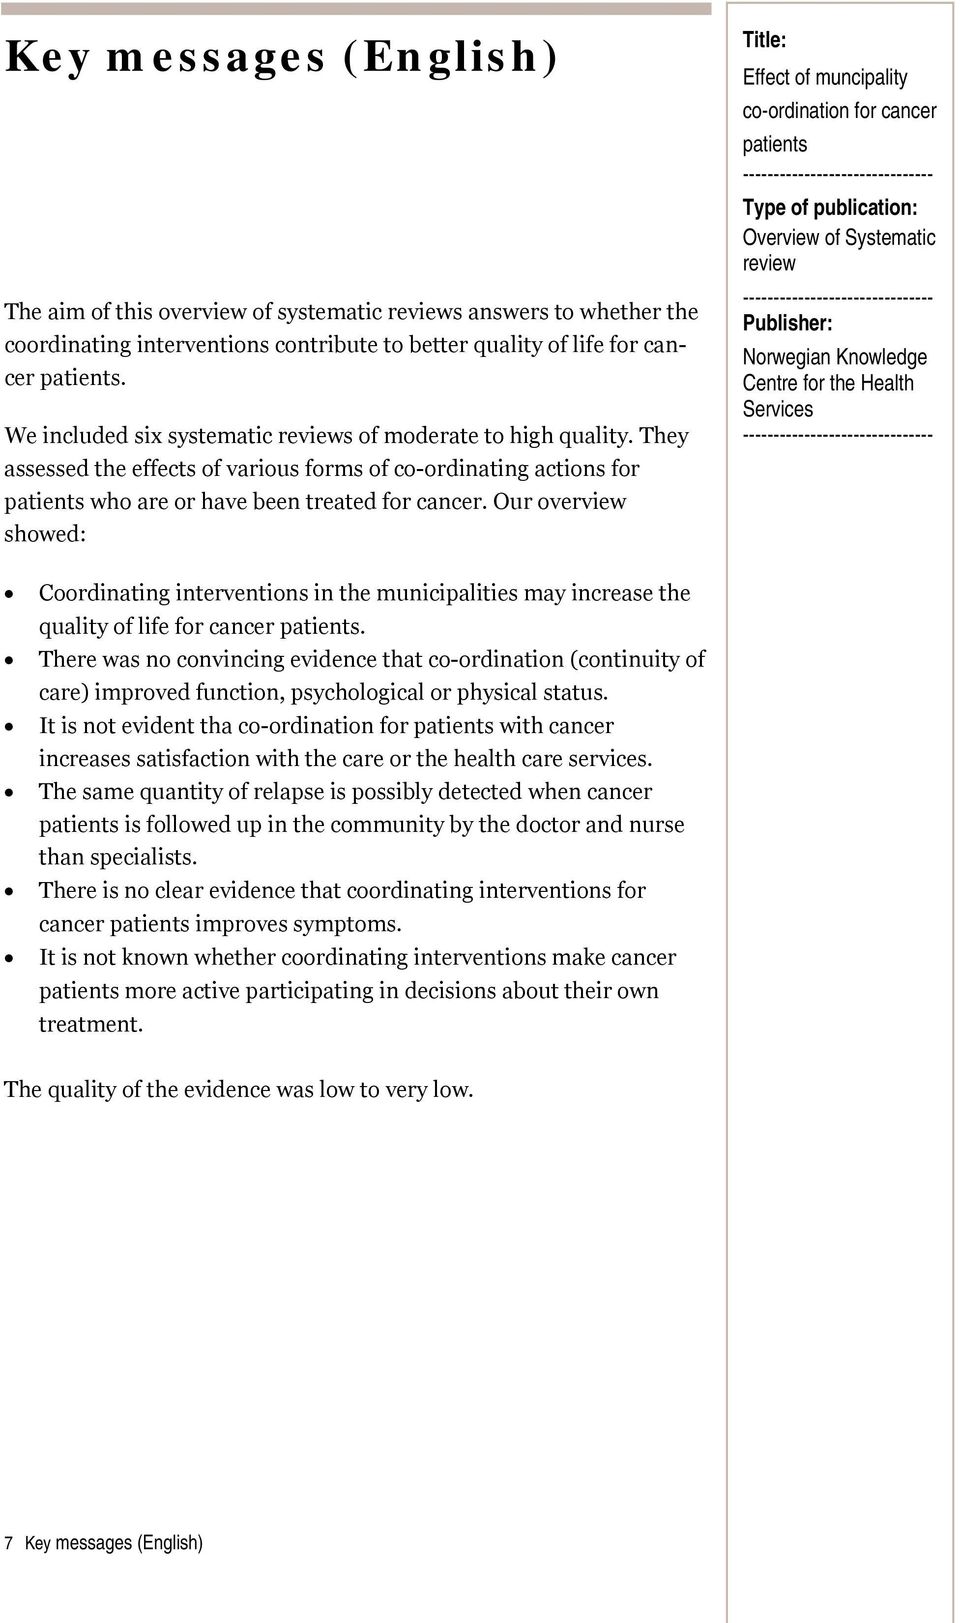 Our overview showed: Title: Effect of muncipality co-ordination for cancer patients ------------------------------- Type of publication: Overview of Systematic review -------------------------------